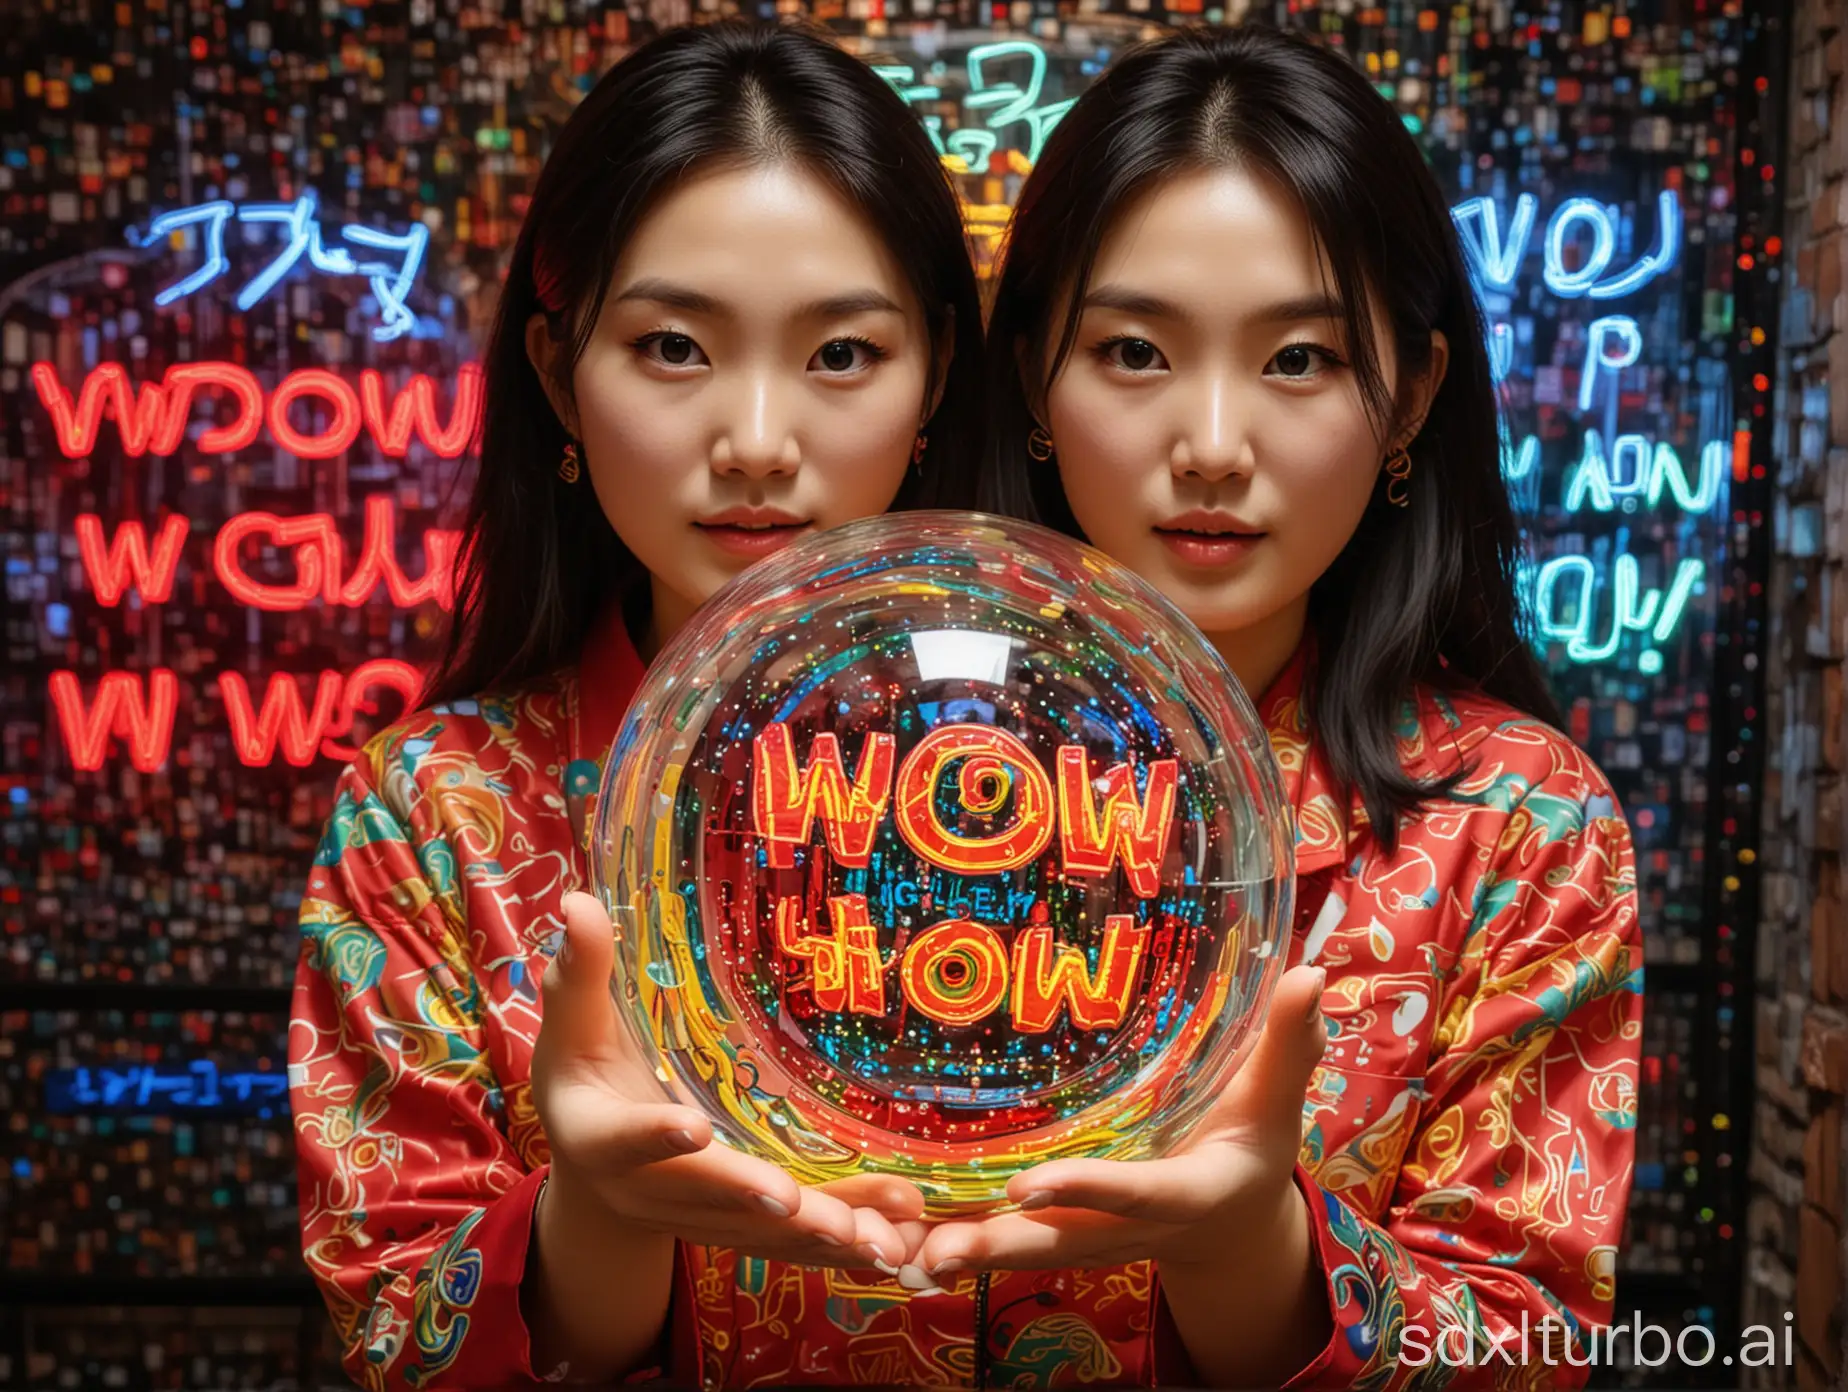 a Korean woman is holding a clear crystal glass ball, inside the glass ball are neon 'wow wow' writings, on the background is a red, yellow, green and blue swirl pattern.